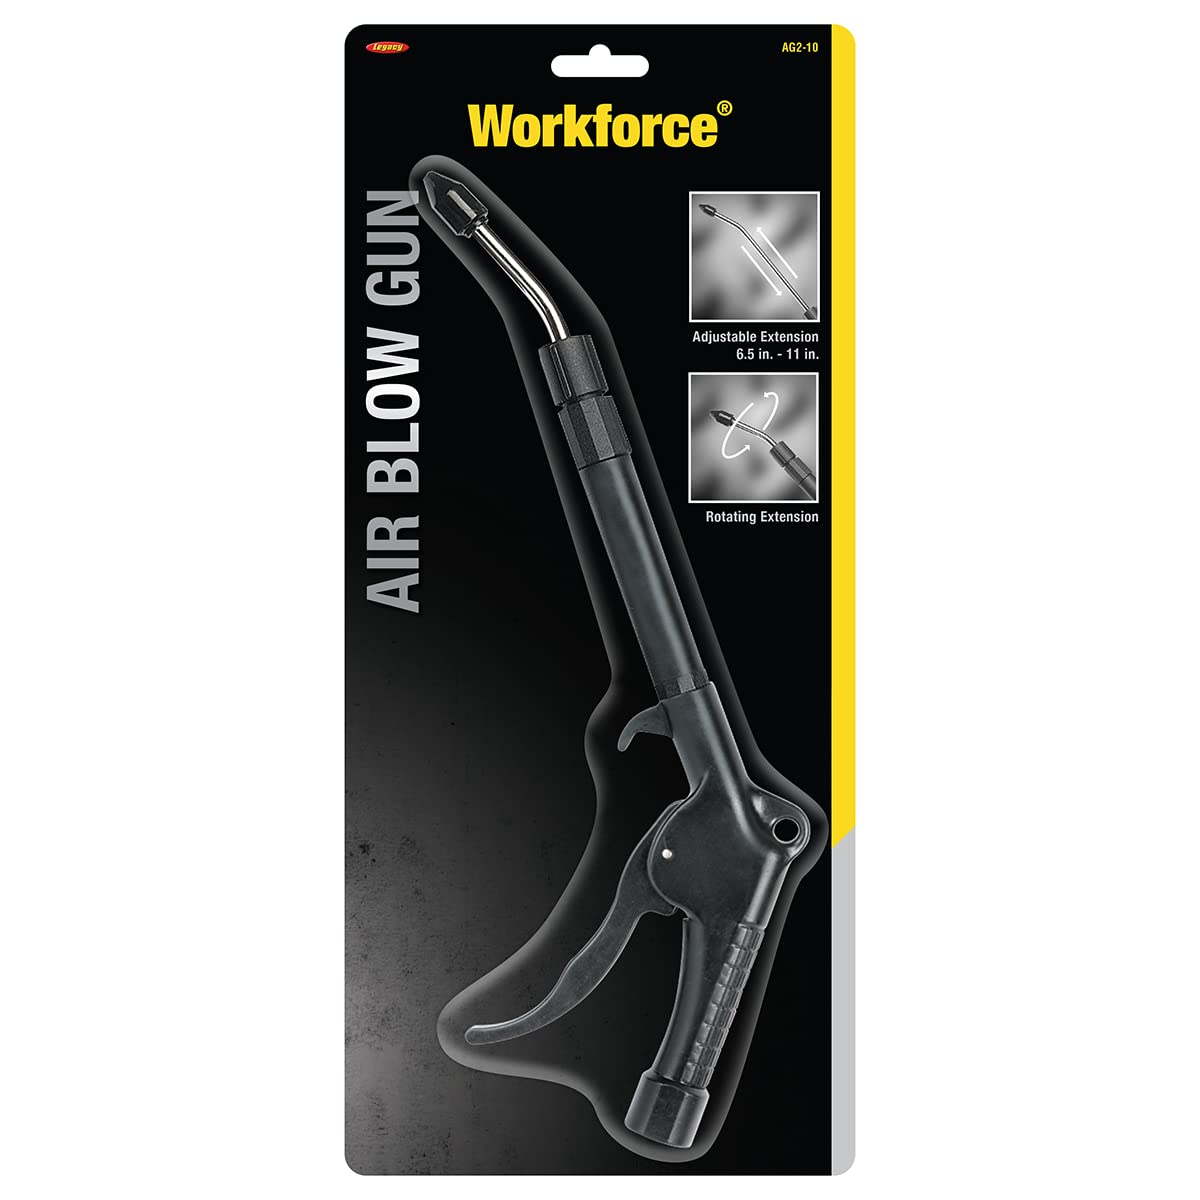 Workforce Blow Gun with 360° Rotating, Adjustable Length Extension - AG2-10 $2.22 @ Amazon